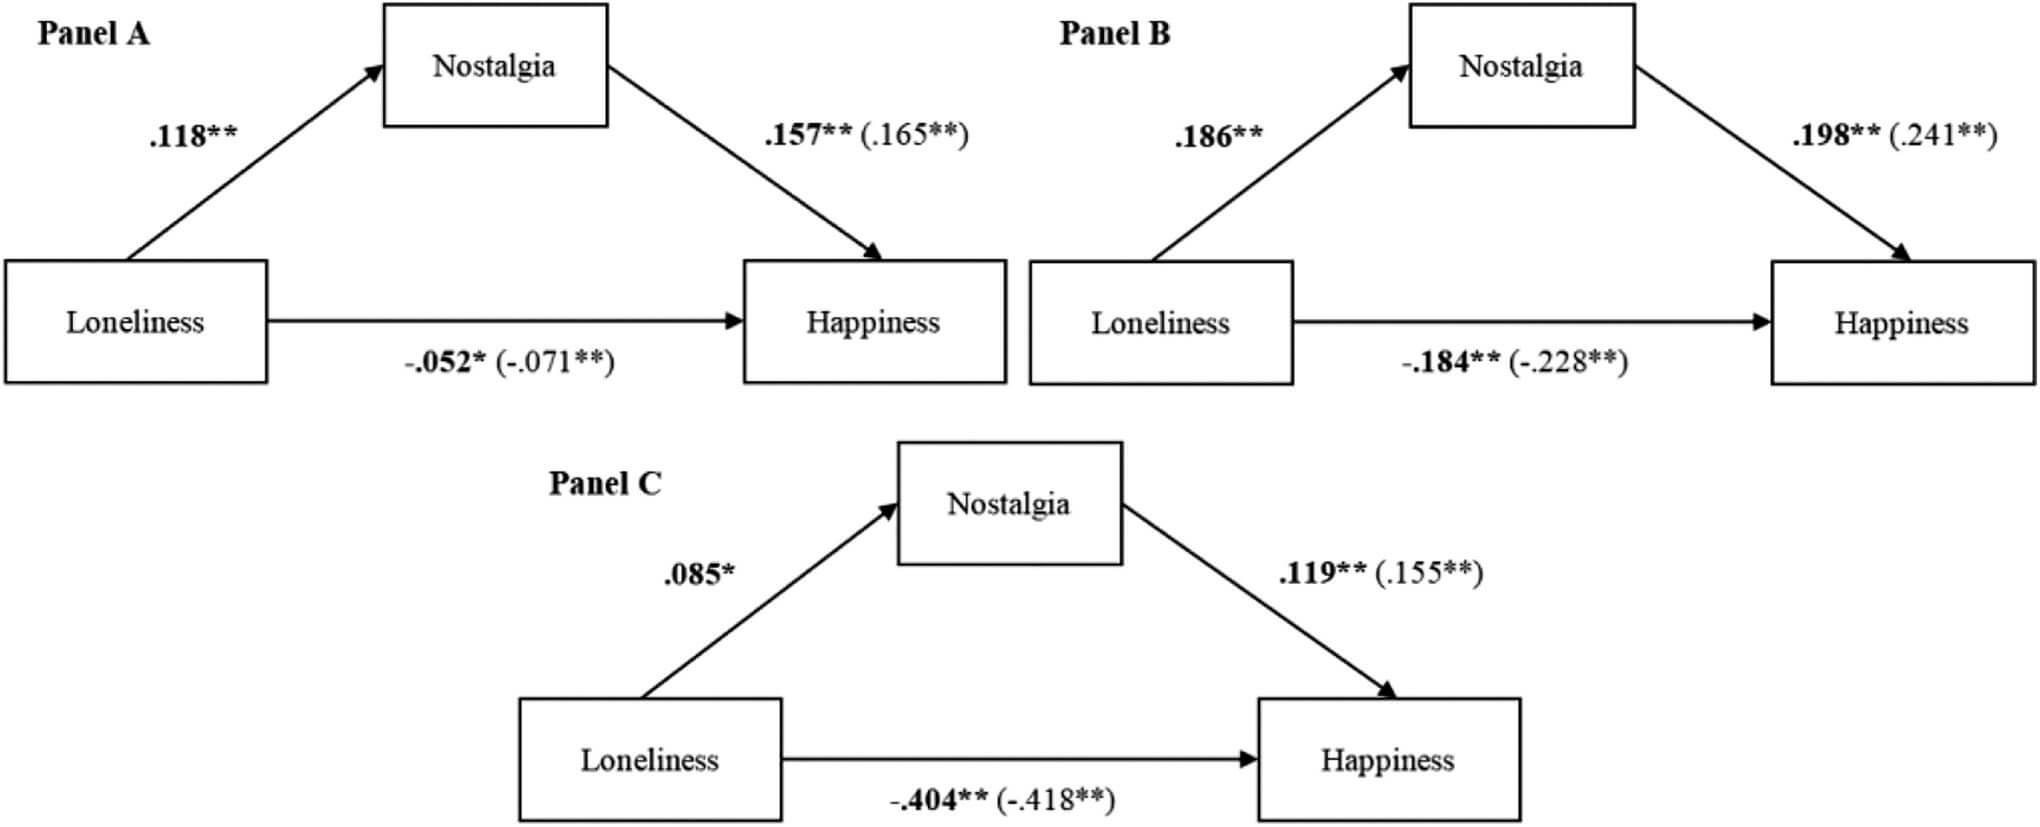 nostalgia reduces loneliness and improves happiness